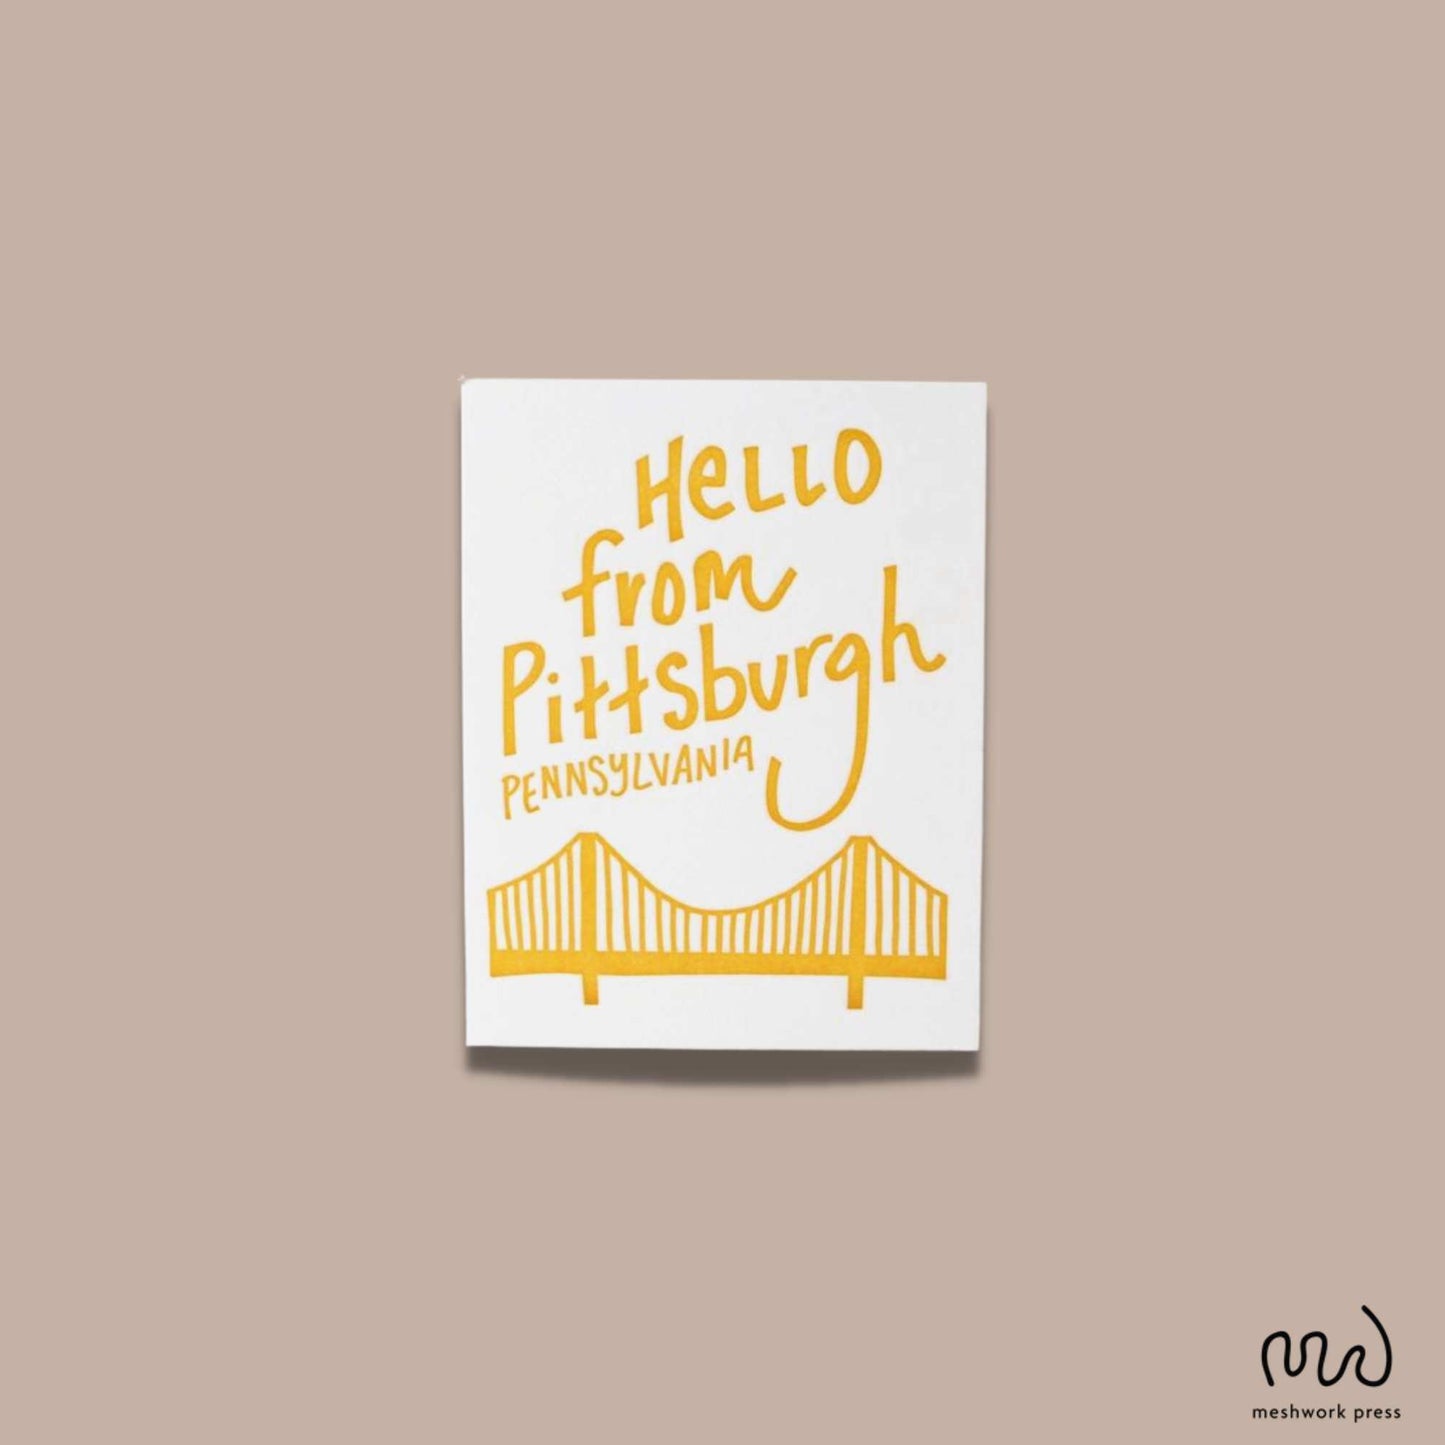 Local Greeting Card Options - Meshwork Press/Sapling Press/Hazelmade - Local Greeting Cards - KINSHIP GIFT - hazelmade, Kinship Corporate Gifting, local greeting cards, locally made, Meshwork Press, Pittsburgh greeting cards, Sapling Press, small business, woman owned - Pittsburgh - gift - boxes - gift - baskets - corporate - gifts - holiday - gifts